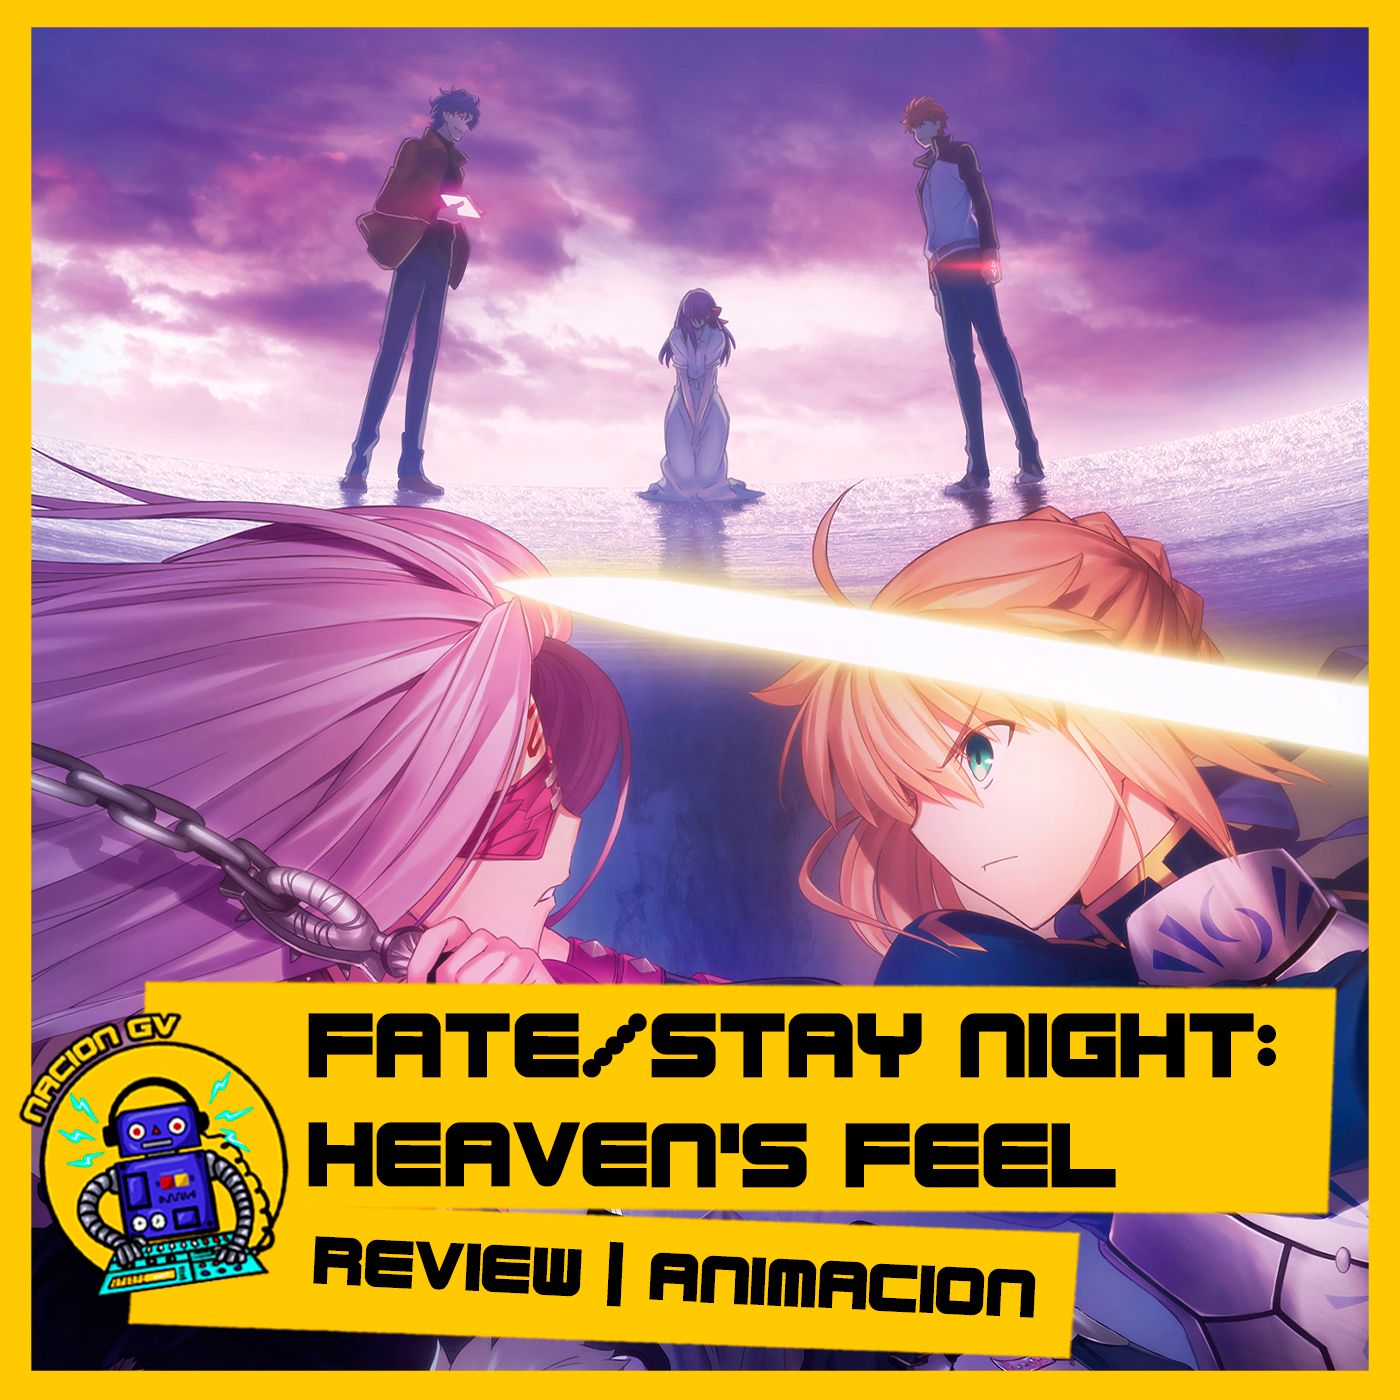 Fate stay night - Heaven's Feel | Review anime | 7 de abril